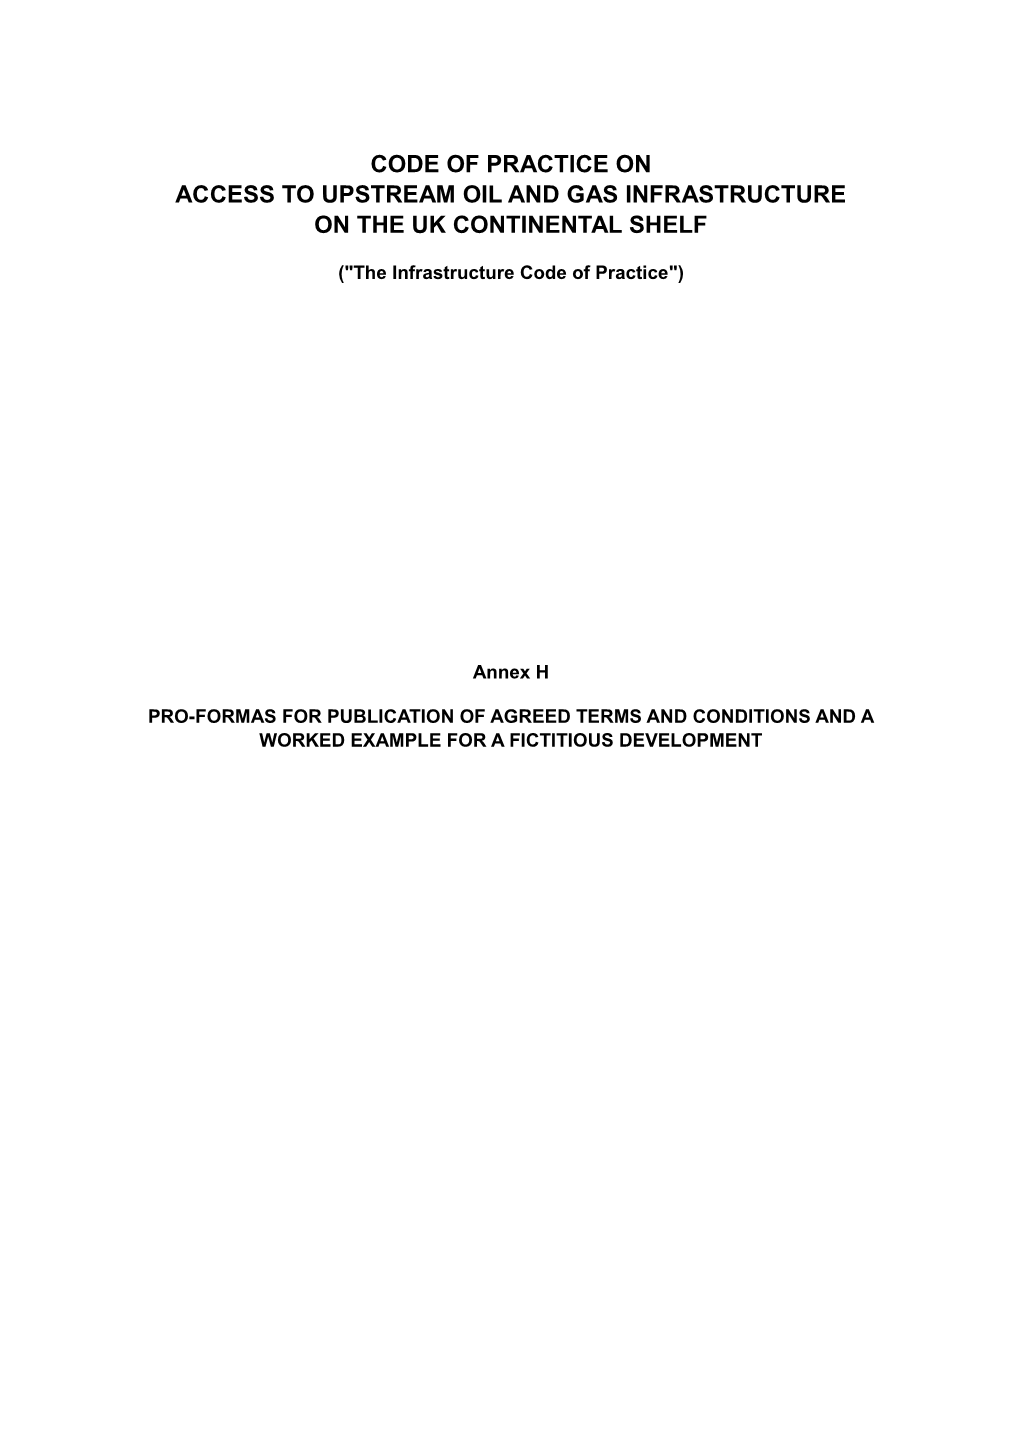 Principles and Procedures Governing Negotiated Access to Upstream Oil and Gas Infrastructure